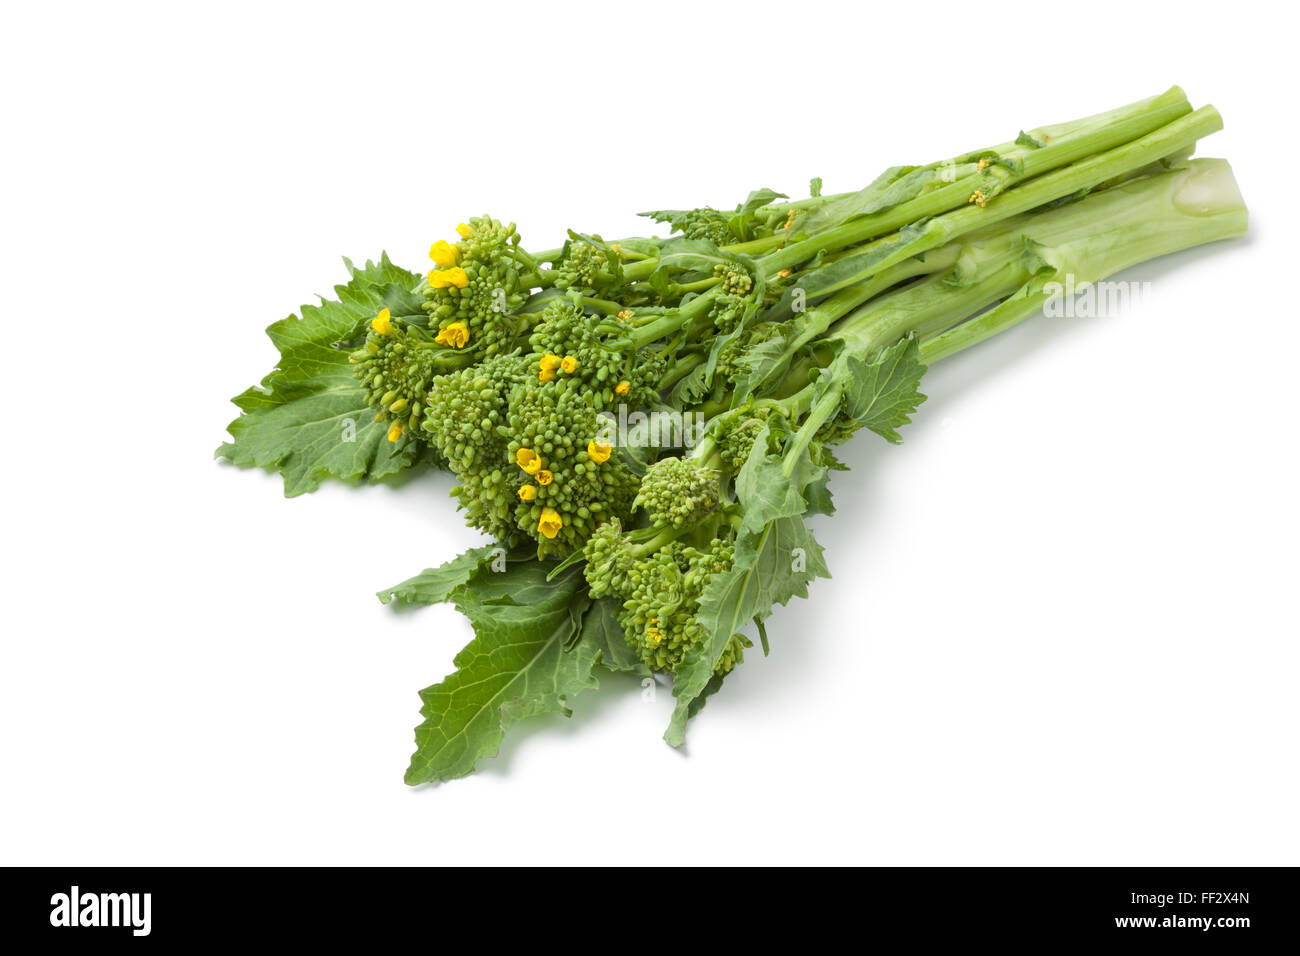 Bunch of fresh picked broccolini on white background Stock Photo